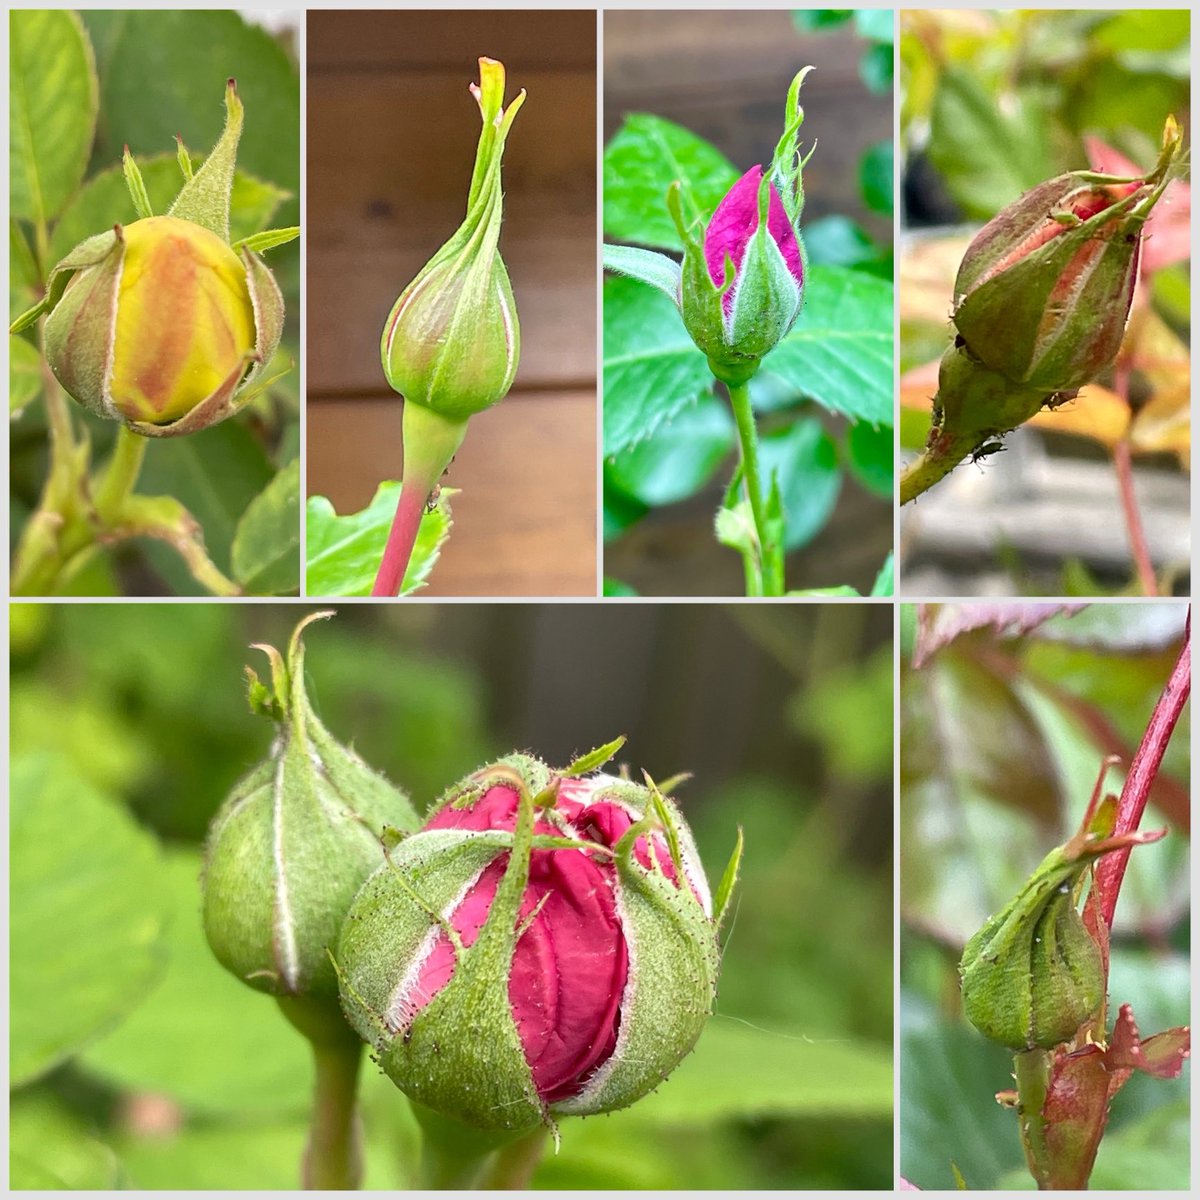 Have a happy Saturday with the promising rosebuds from my garden.🌹I will soon post an update! (Unfortunately, the aphids are also very interested...)🧐😄#SixOnSaturday #gardening #roses